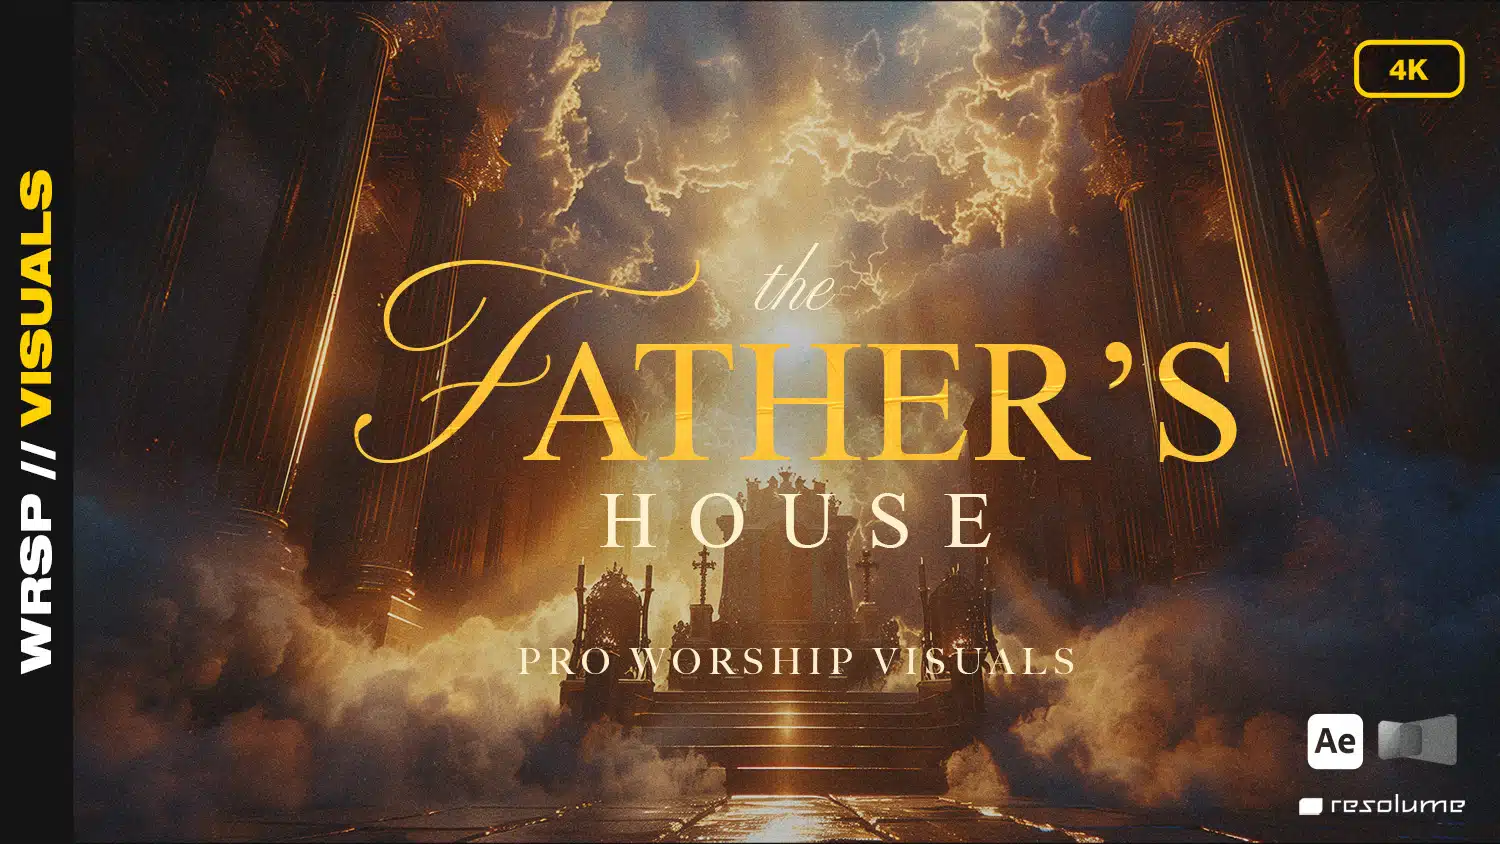 the father's house worship visuals